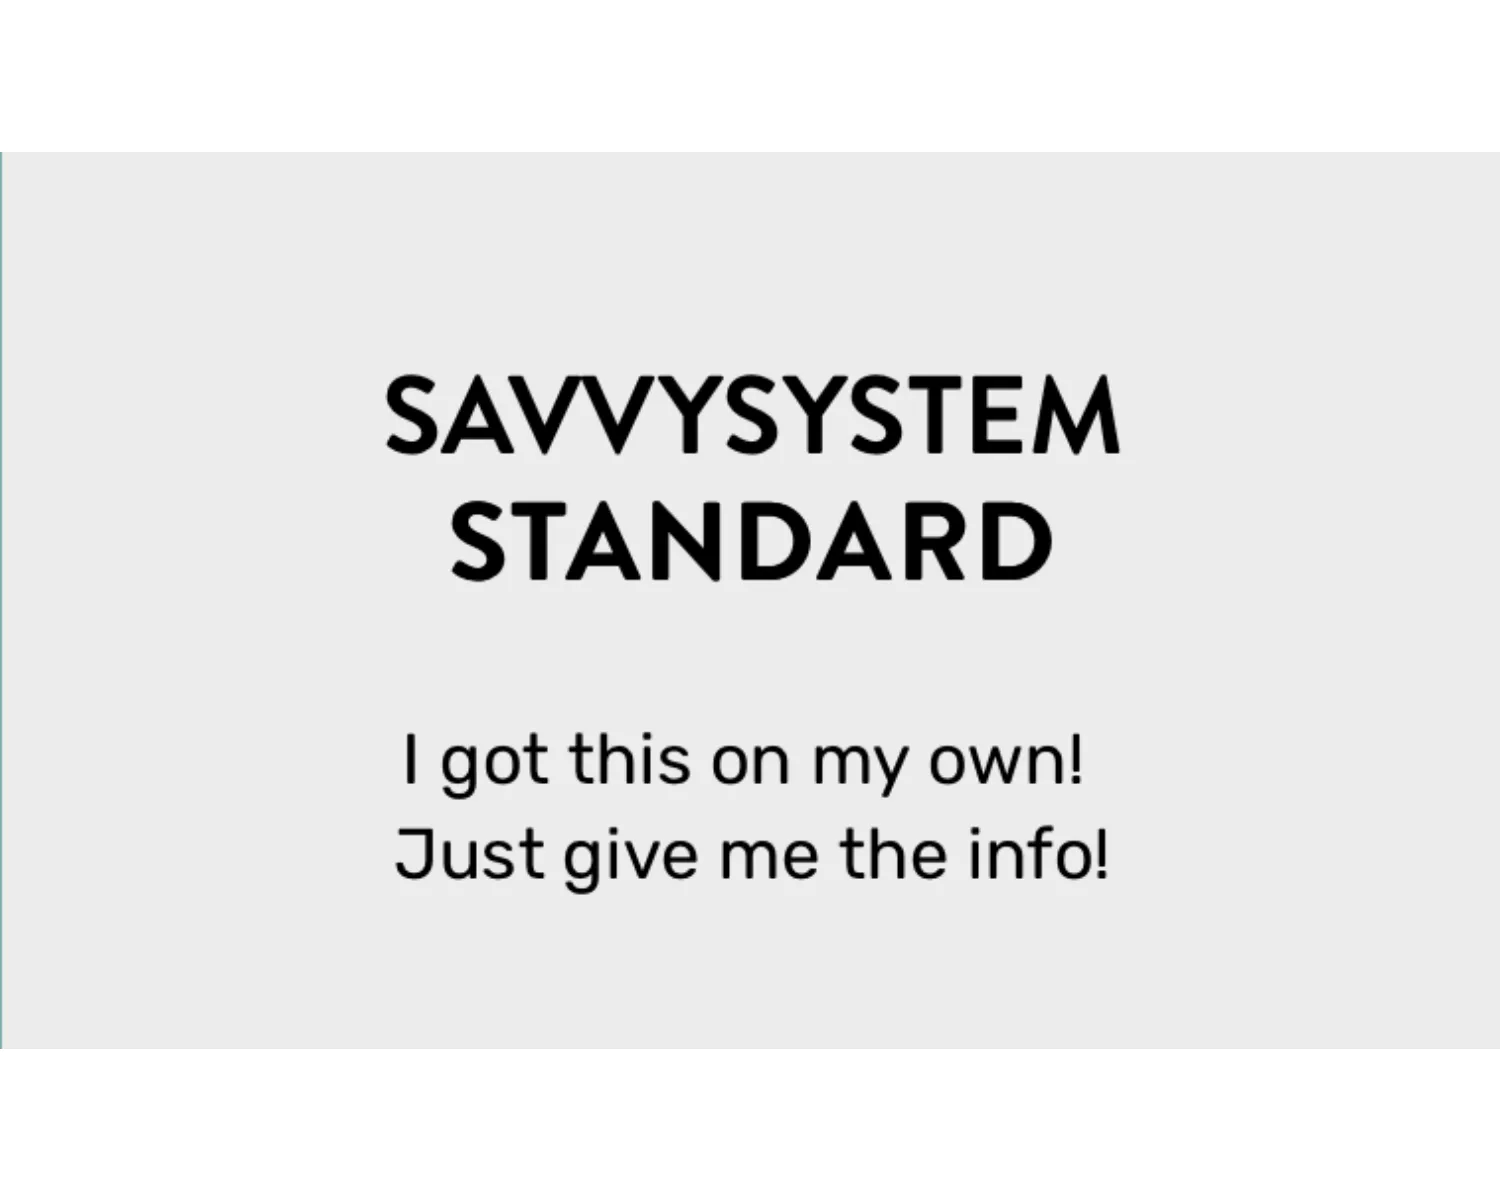 The Savvy System